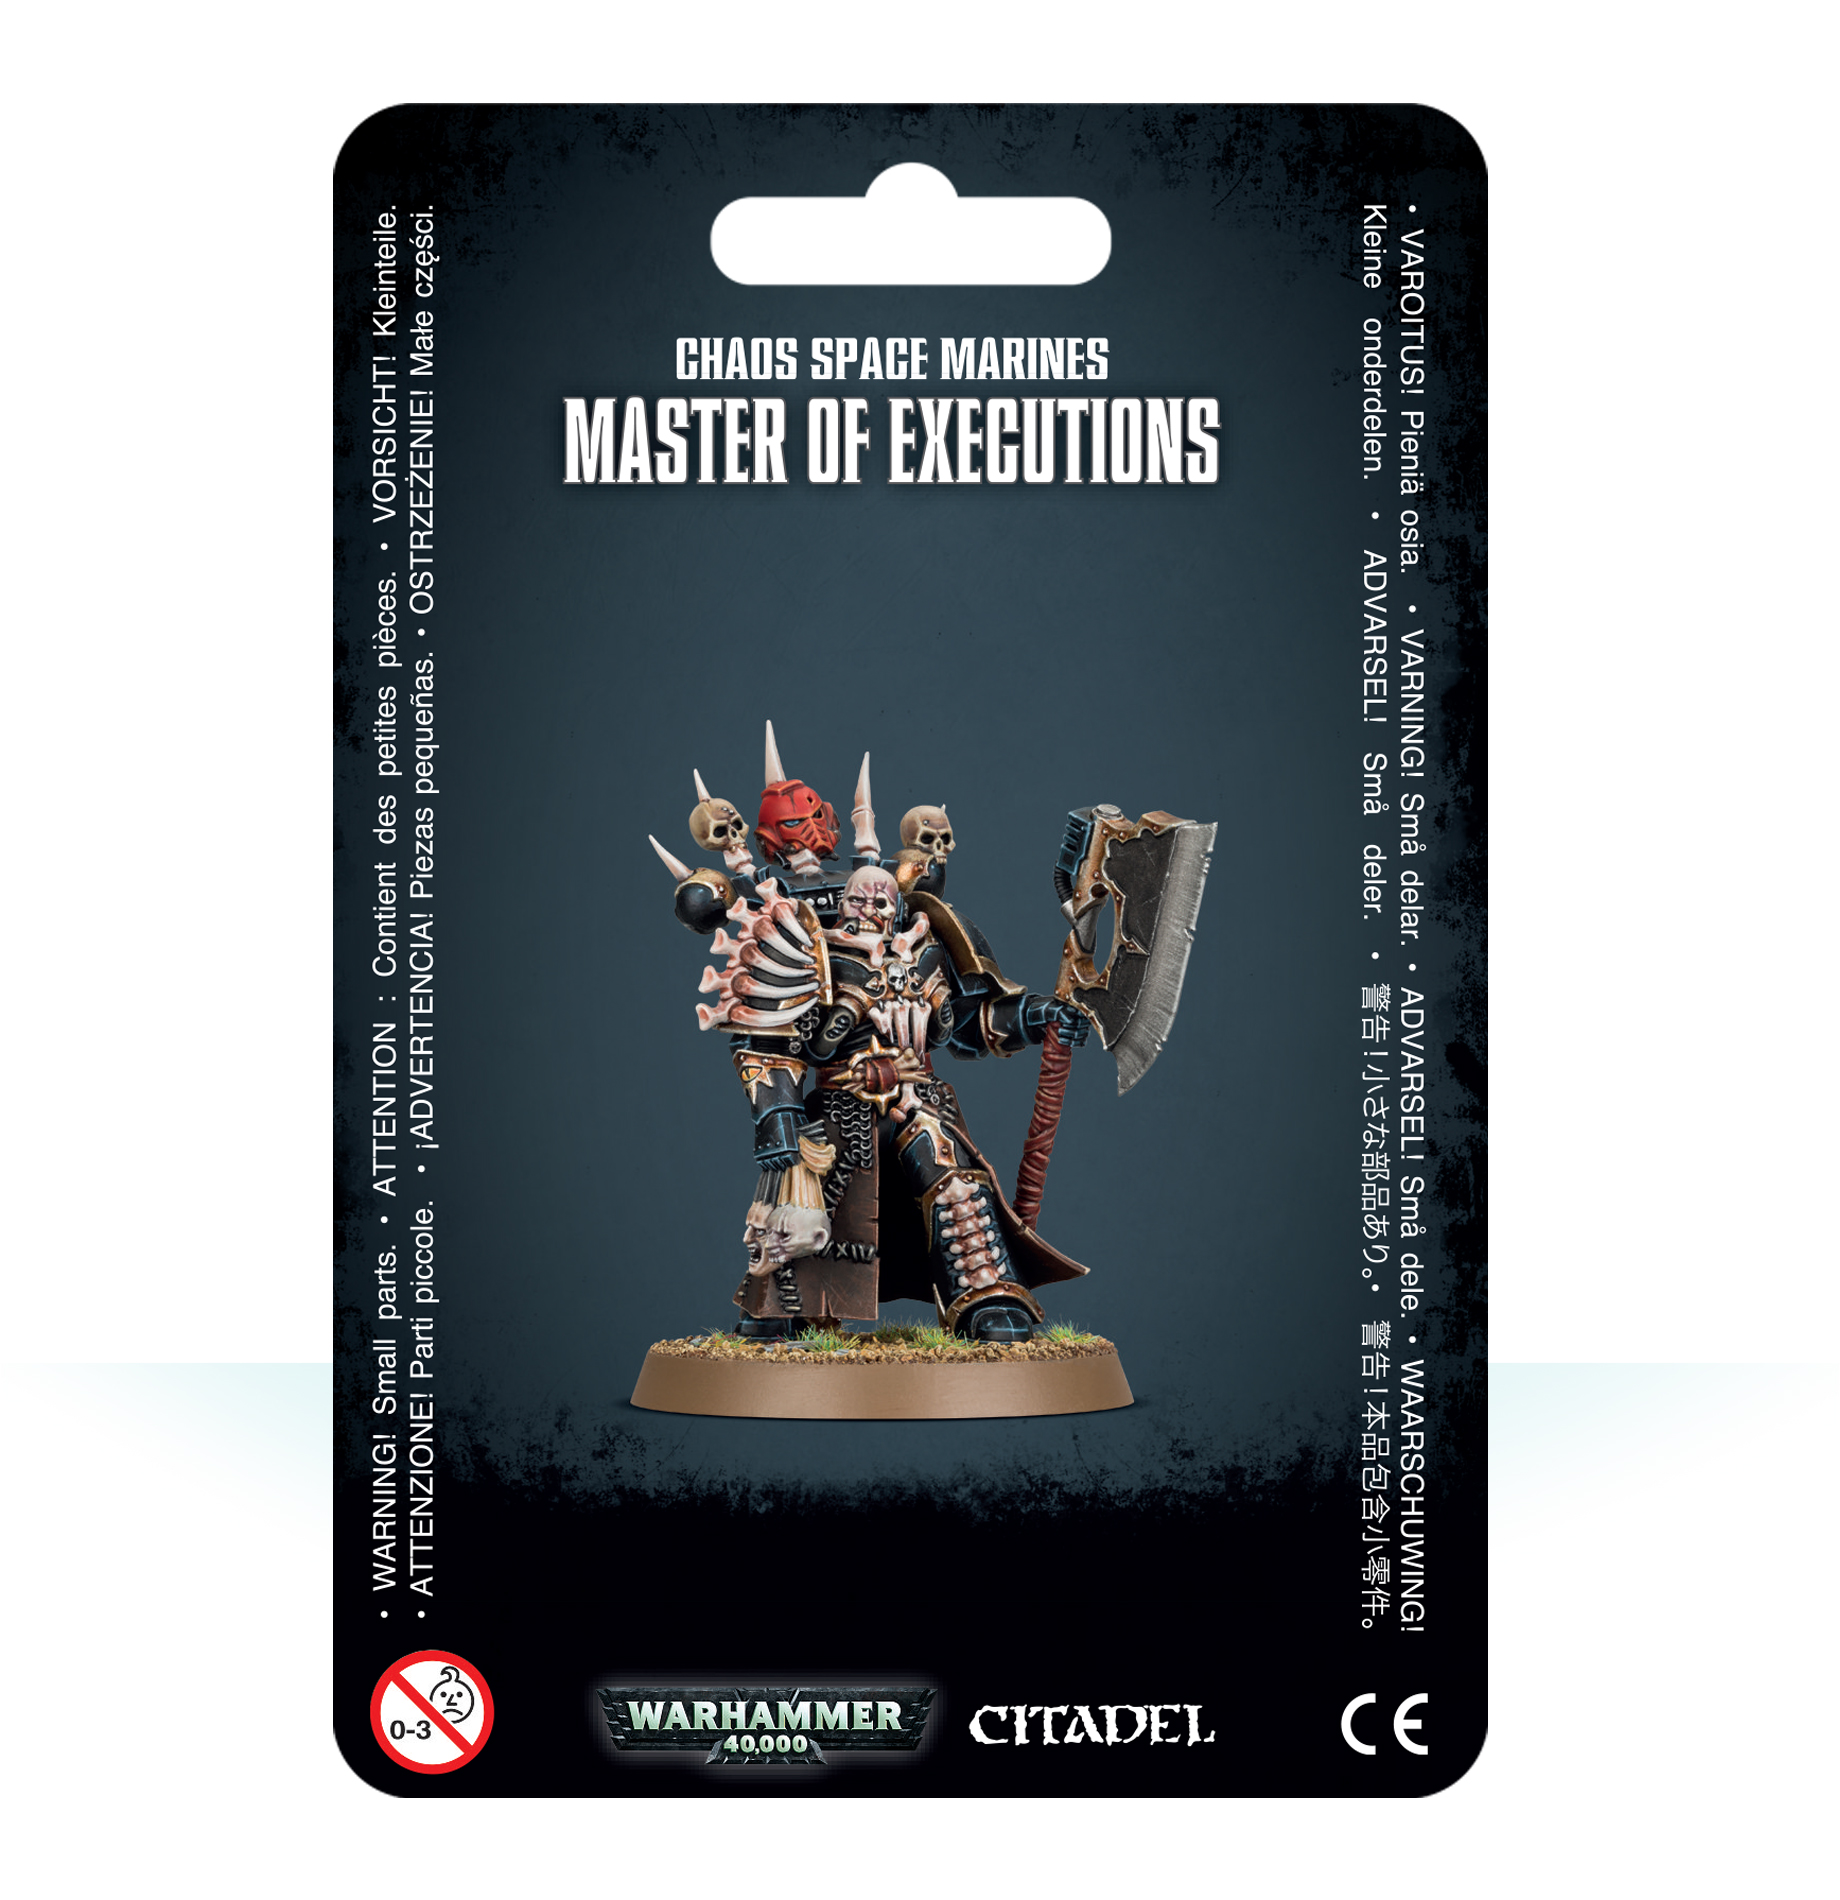 Chaos Space Marines Master of Executions GW-43-44 Warhammer 40,000 